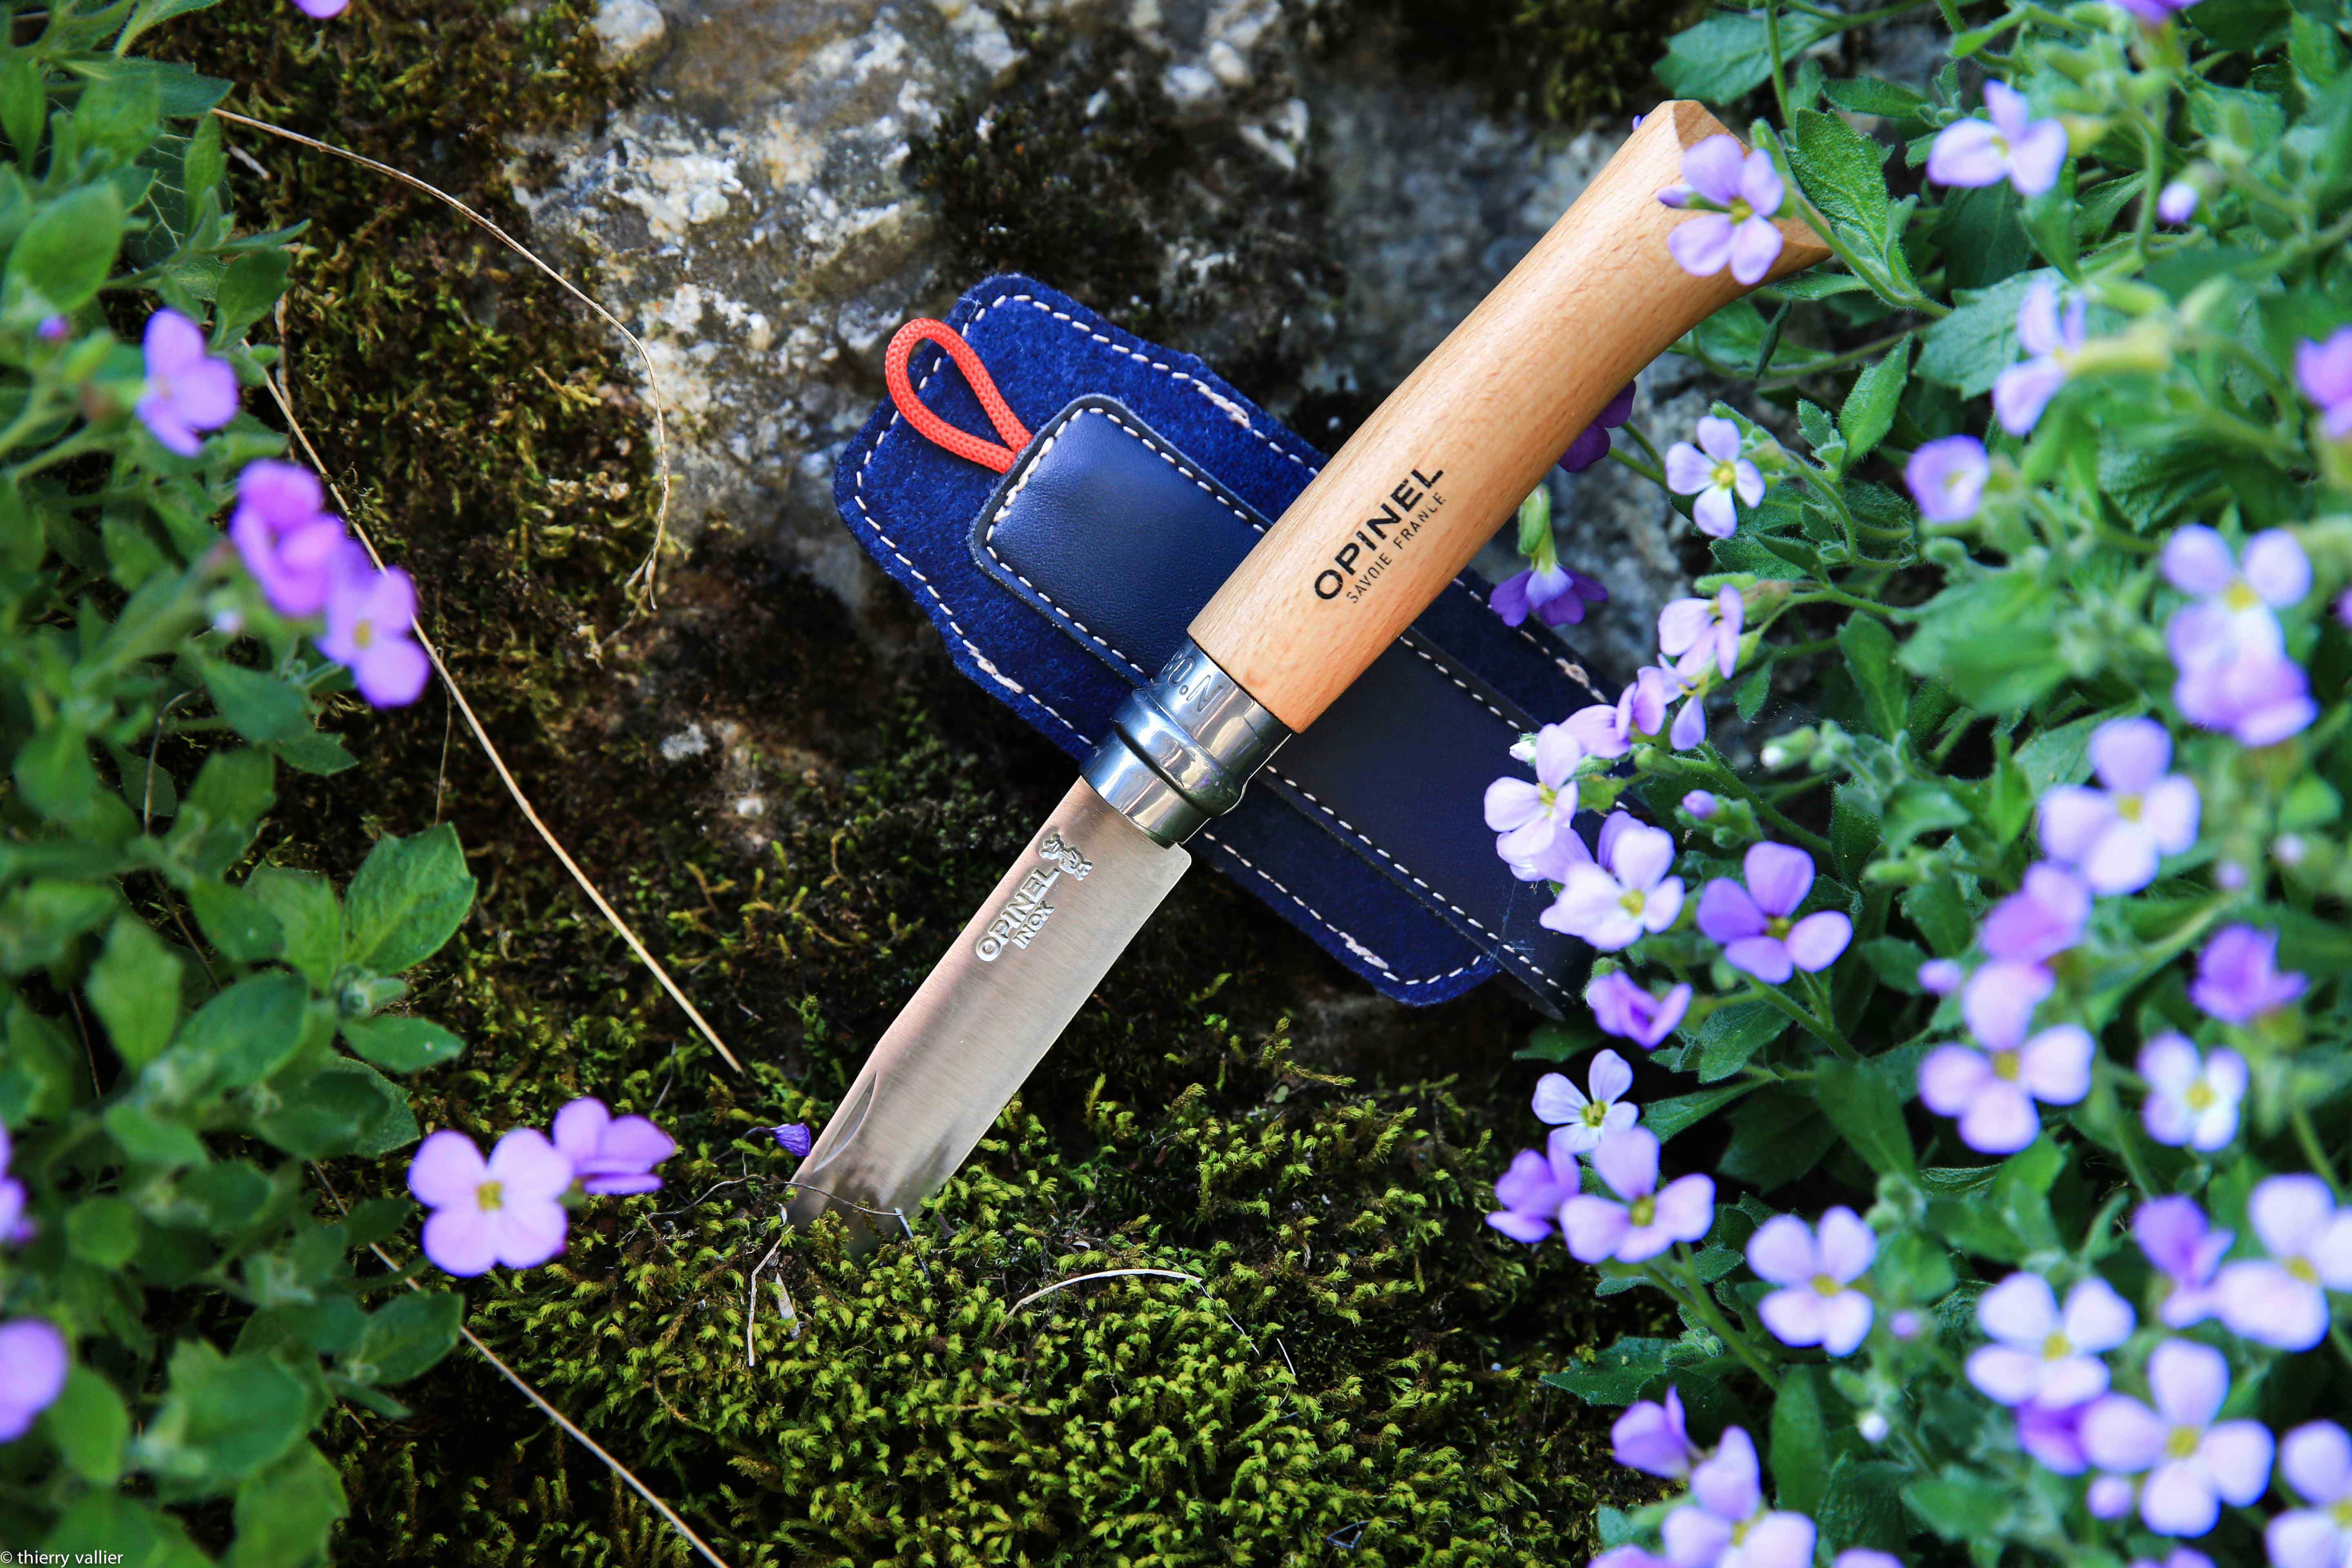 Etuis Opinel couteaux outdoor chic alpine